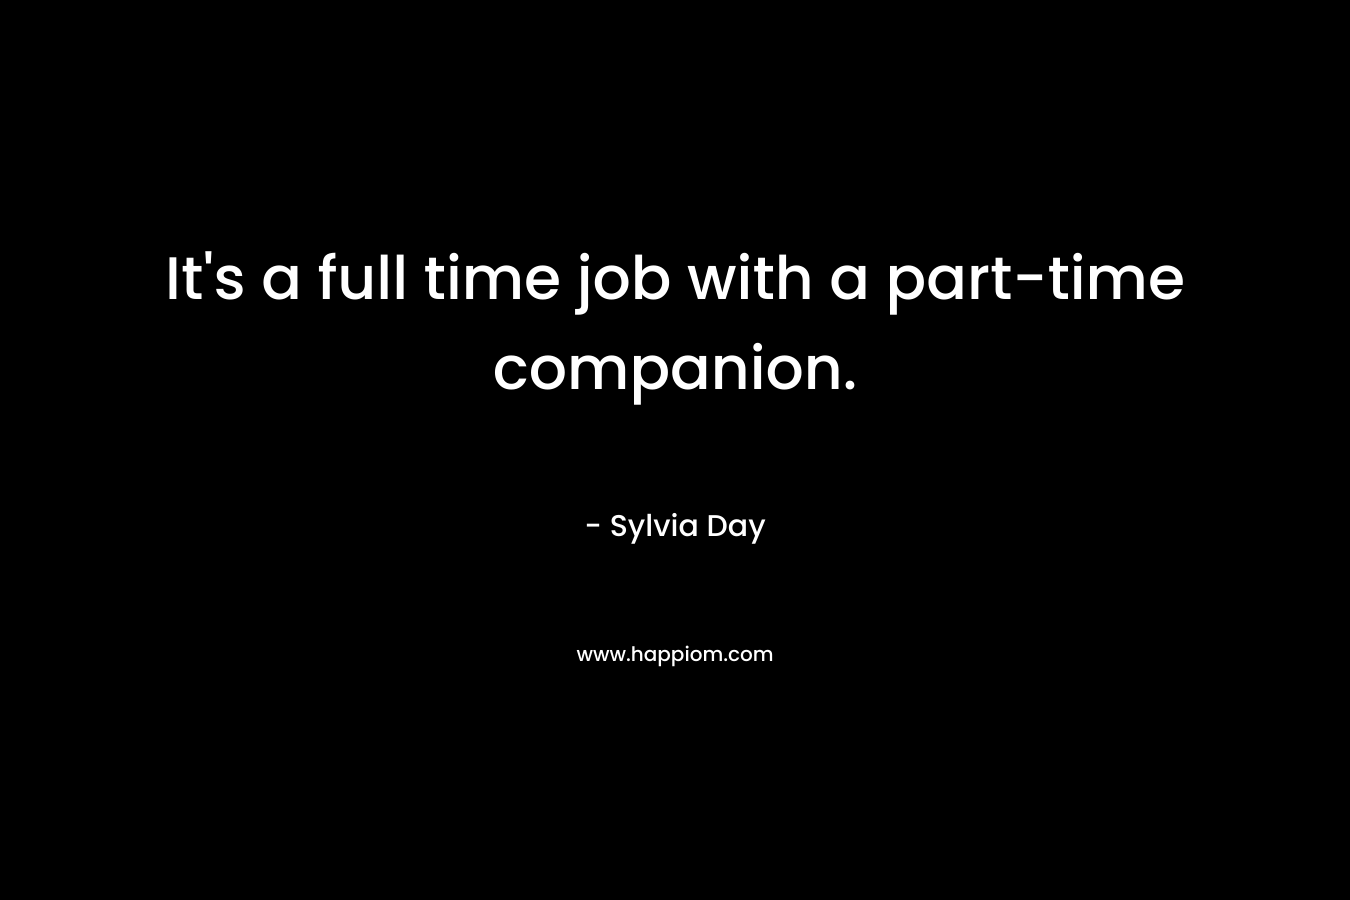 It’s a full time job with a part-time companion. – Sylvia Day